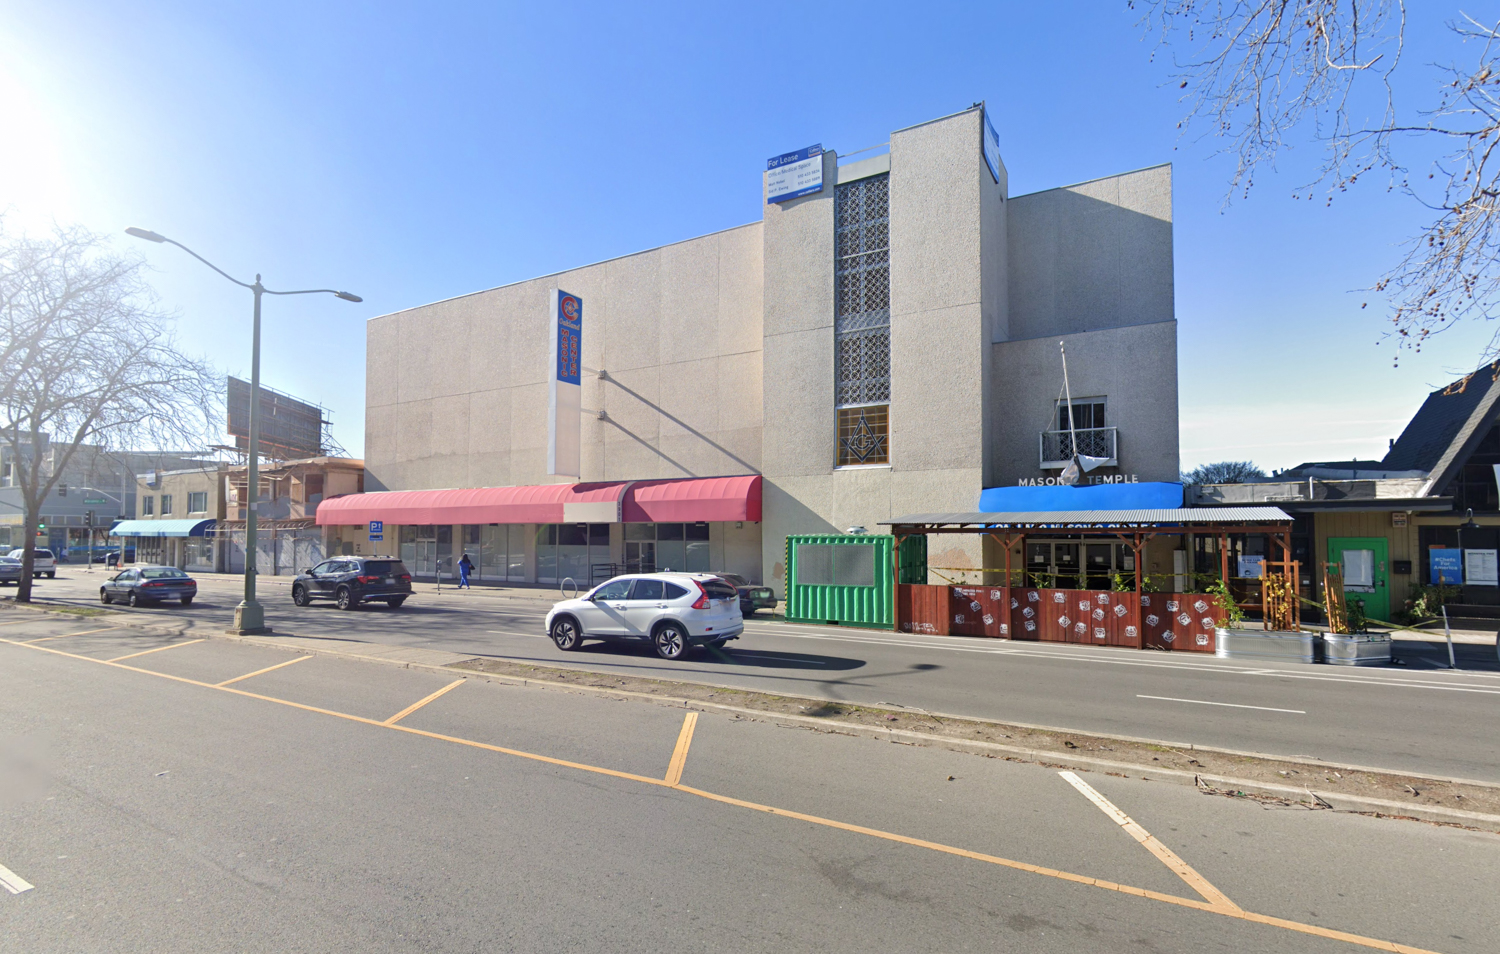 The office structure at 3903 Broadway which will not be demolished, image via Google Street View